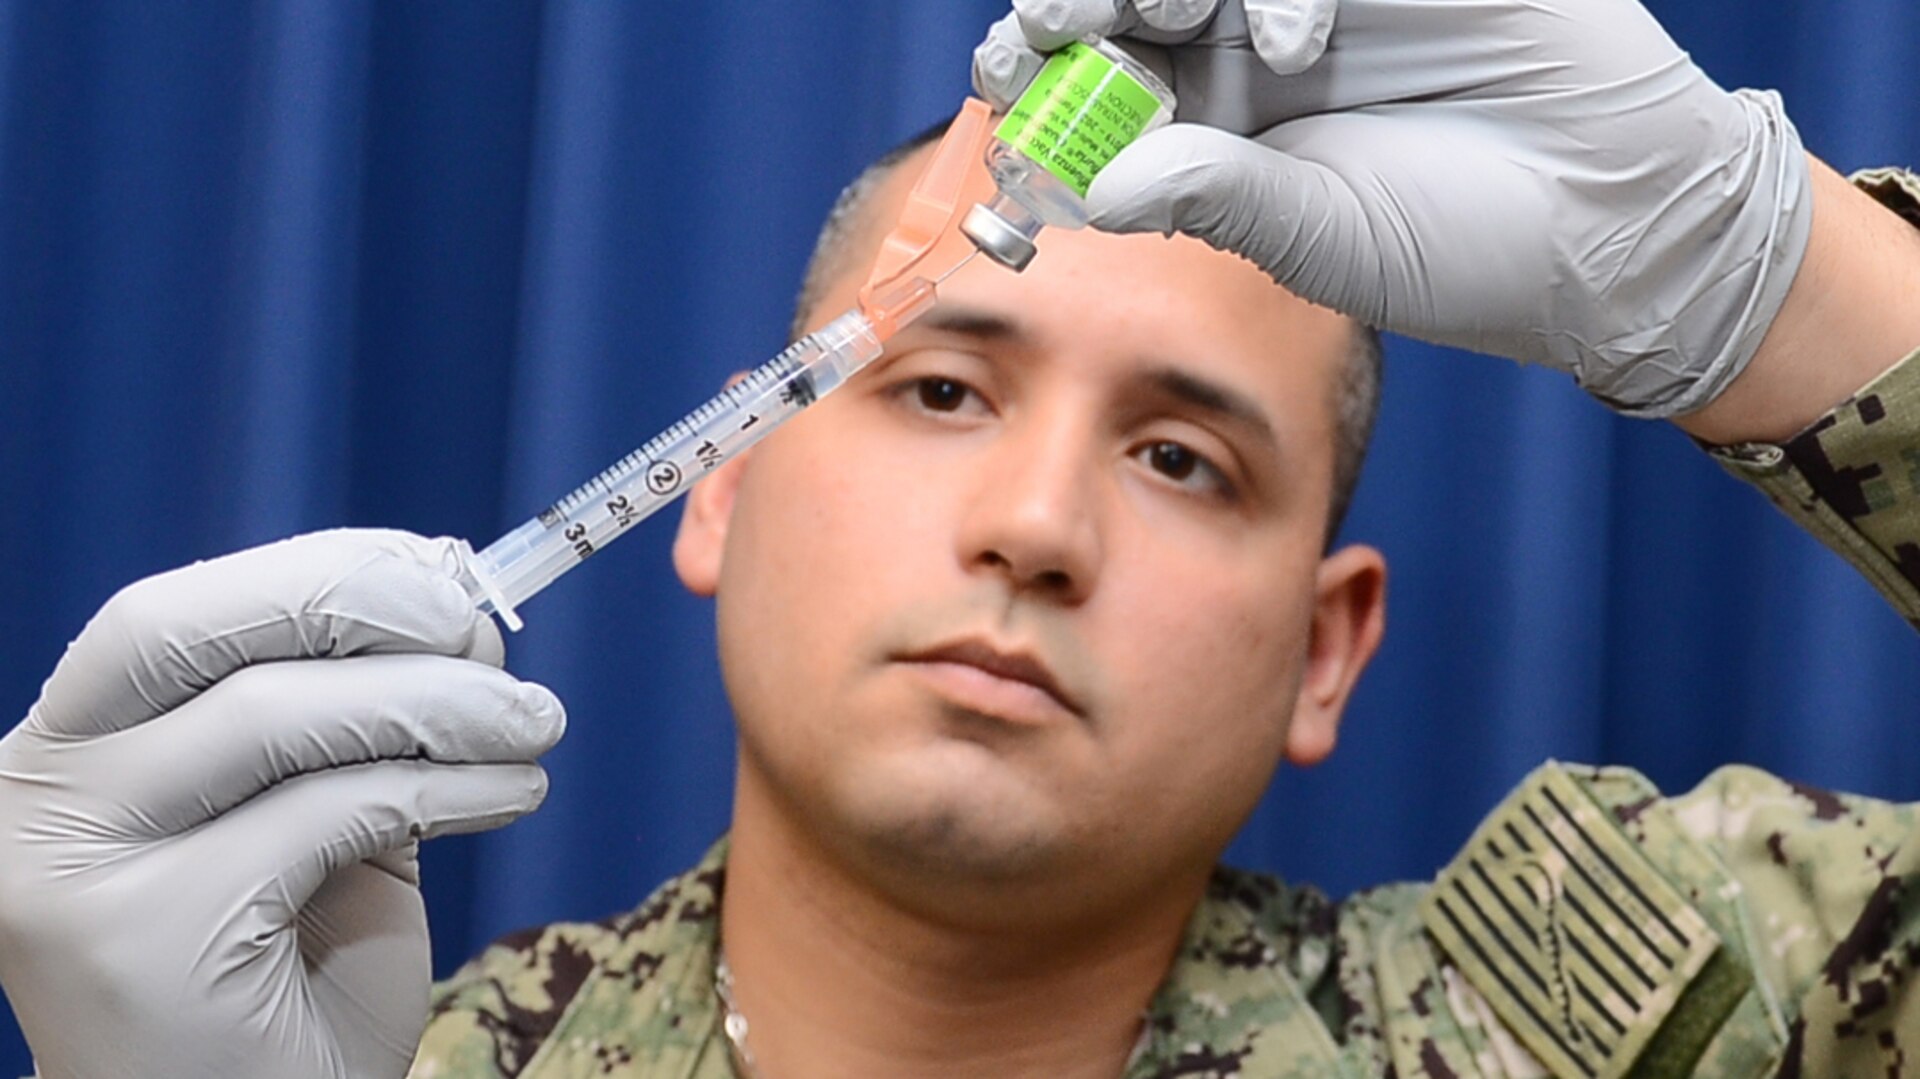 A man wearing gloves prepares a syringe with the influenza vaccine